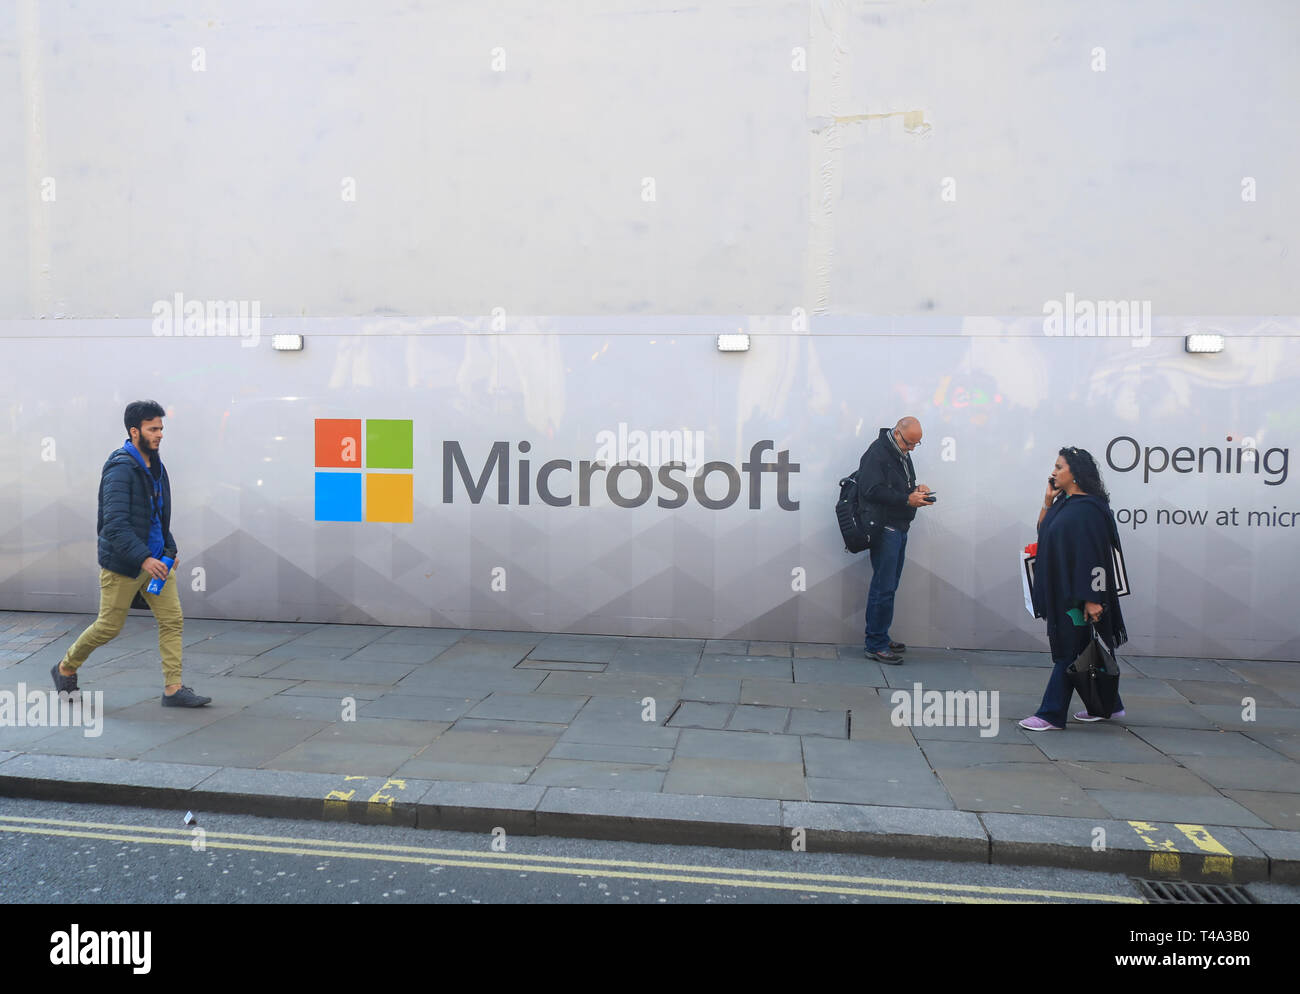 London, UK. 15th Apr, 2019. Pedestrians walk past a wall with the logo Microsoft Software giant as a new store prepares to open Oxford Street Credit: amer ghazzal/Alamy Live News Stock Photo